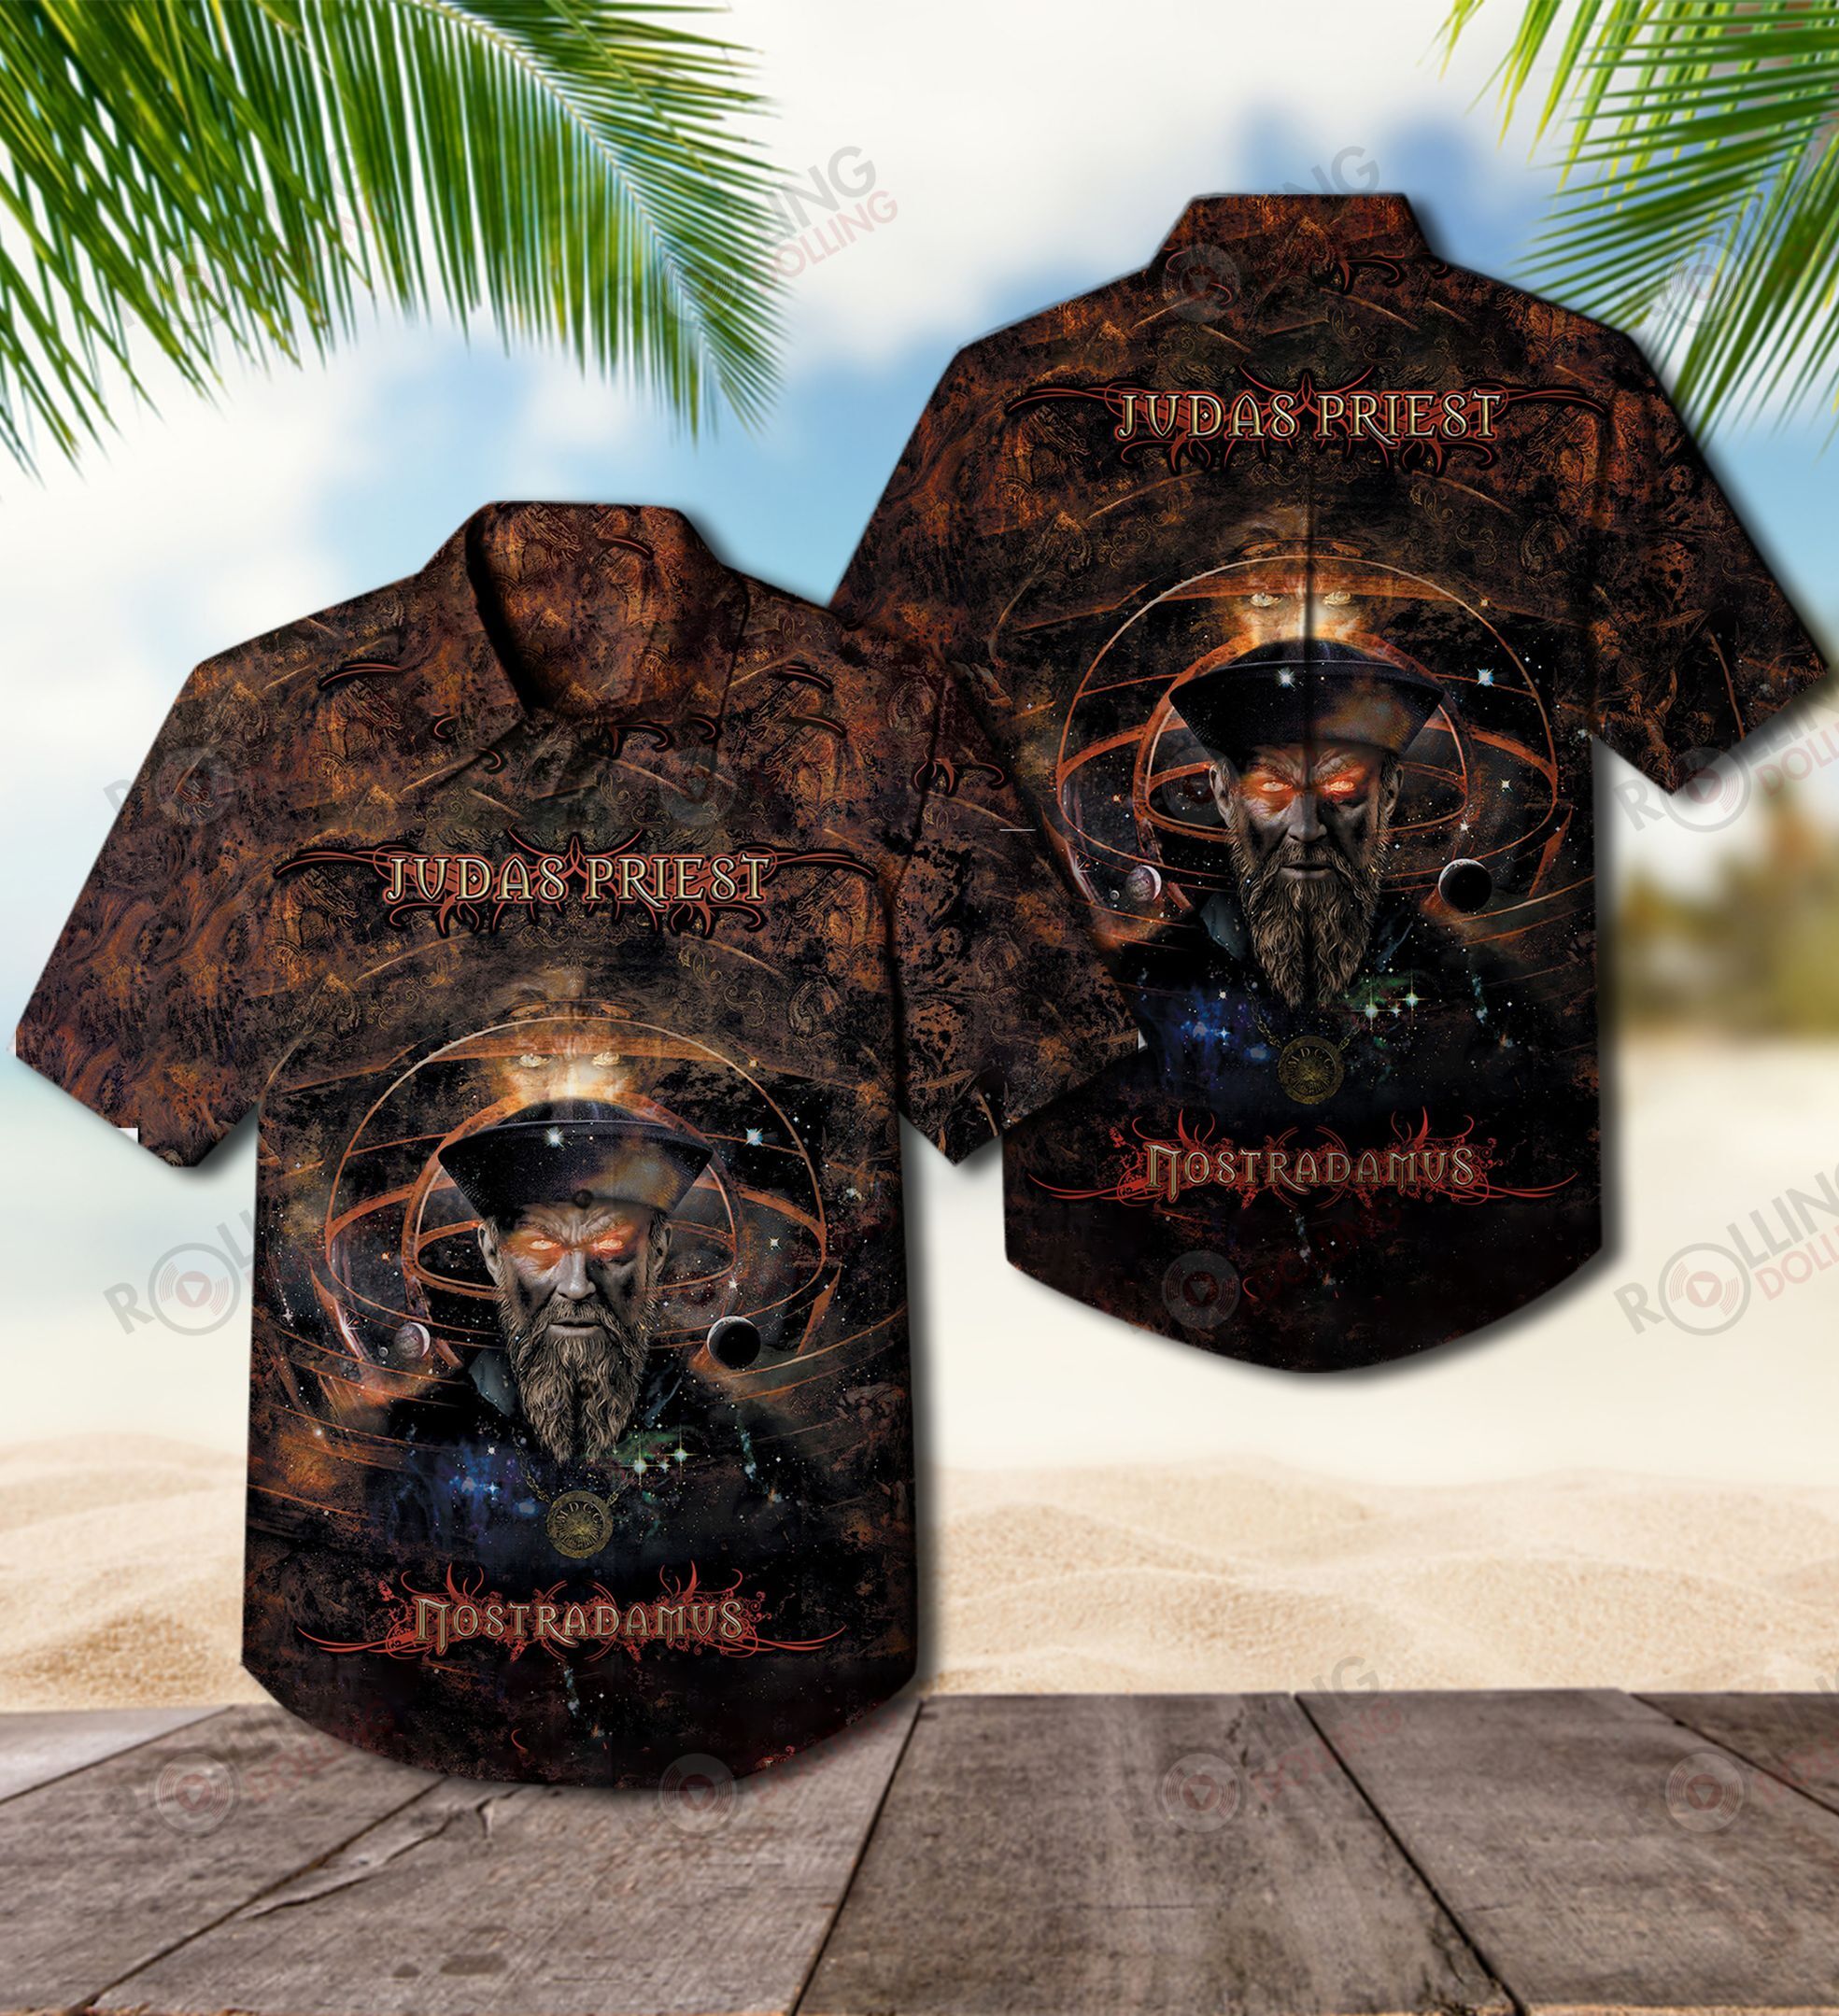 This would make a great gift for any fan who loves Hawaiian Shirt as well as Rock band 110